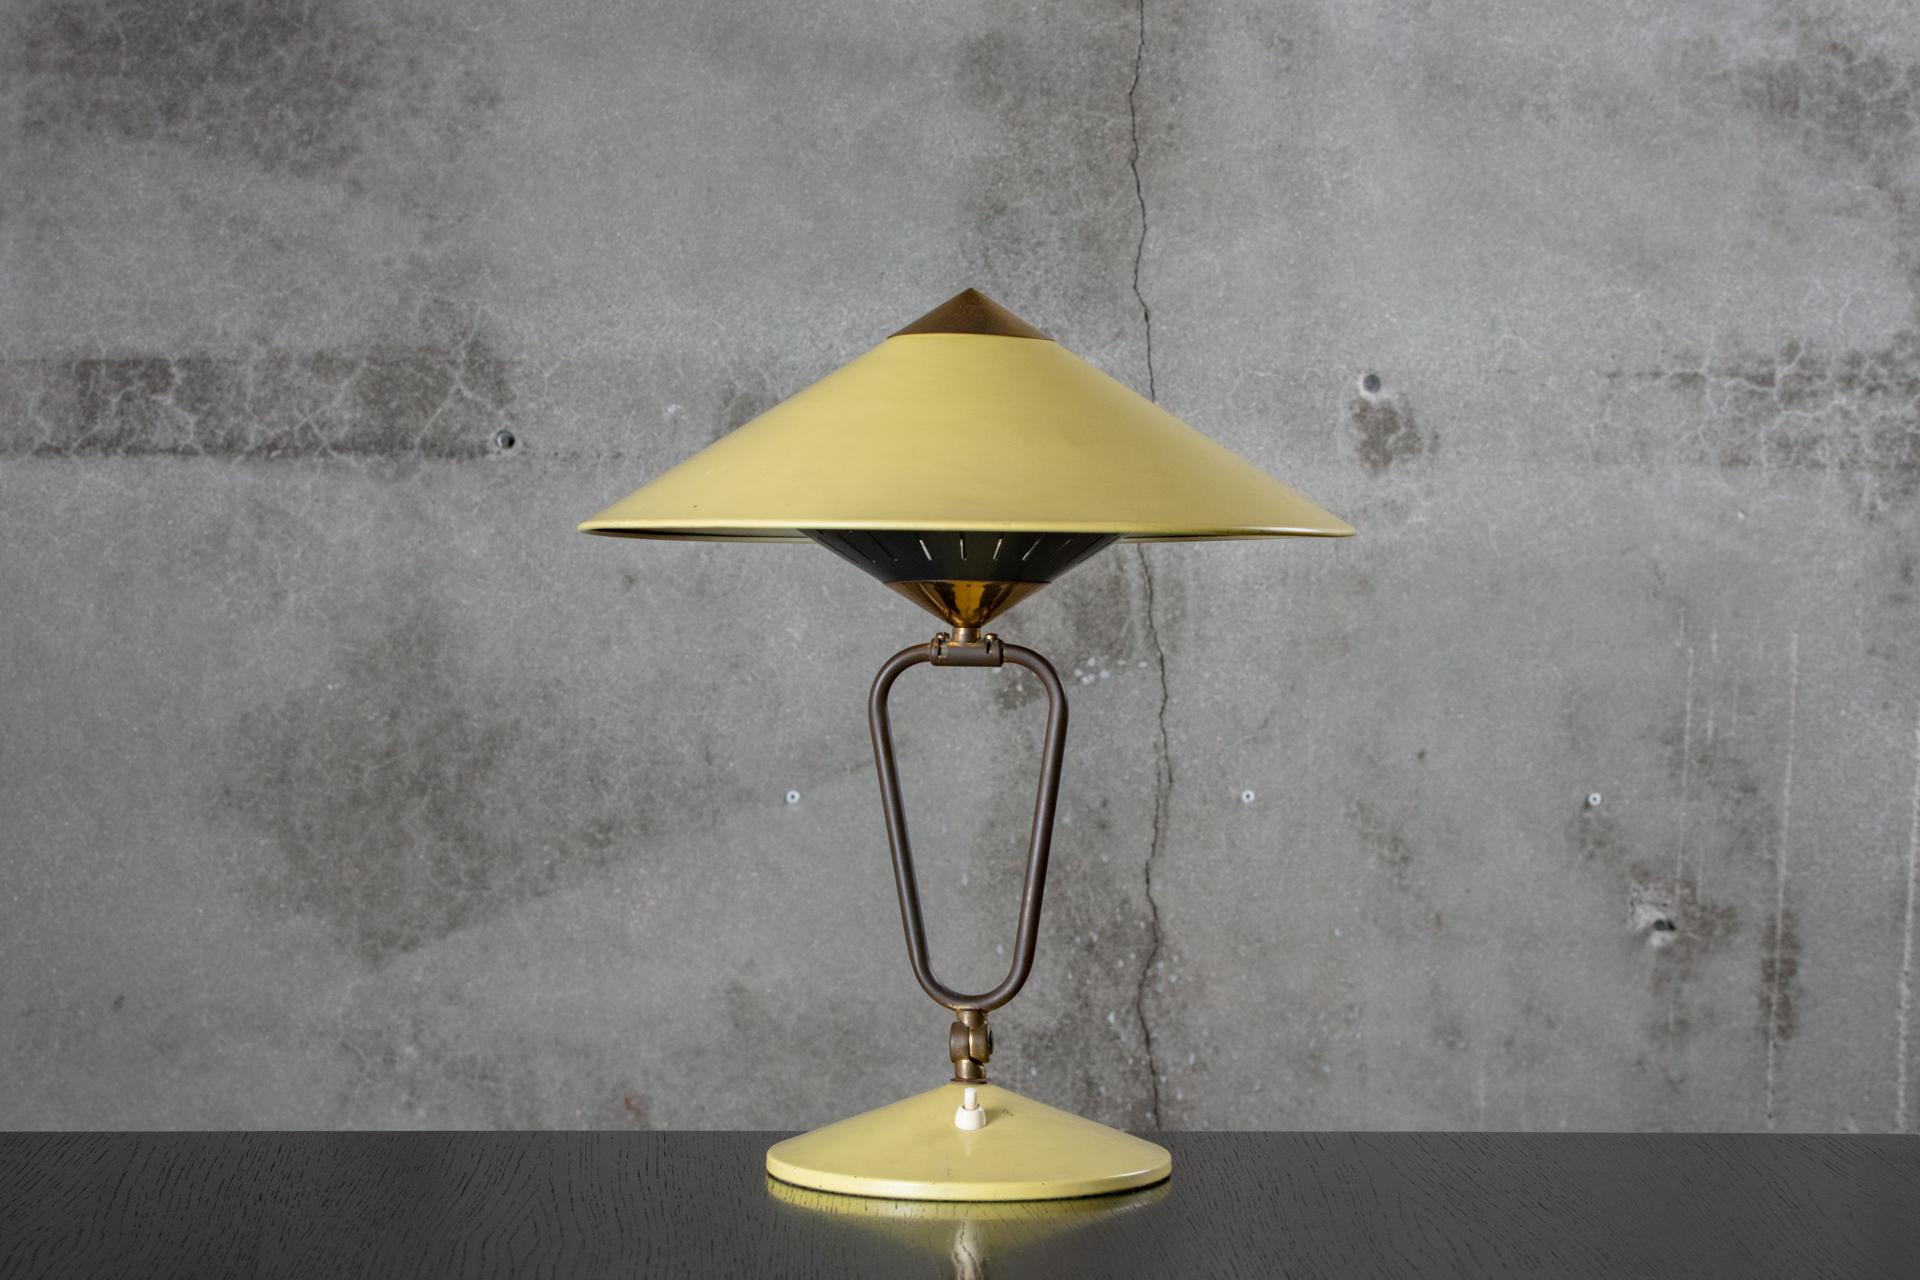 Swivel table lamp with a yellow metal shade, from the 1950s.